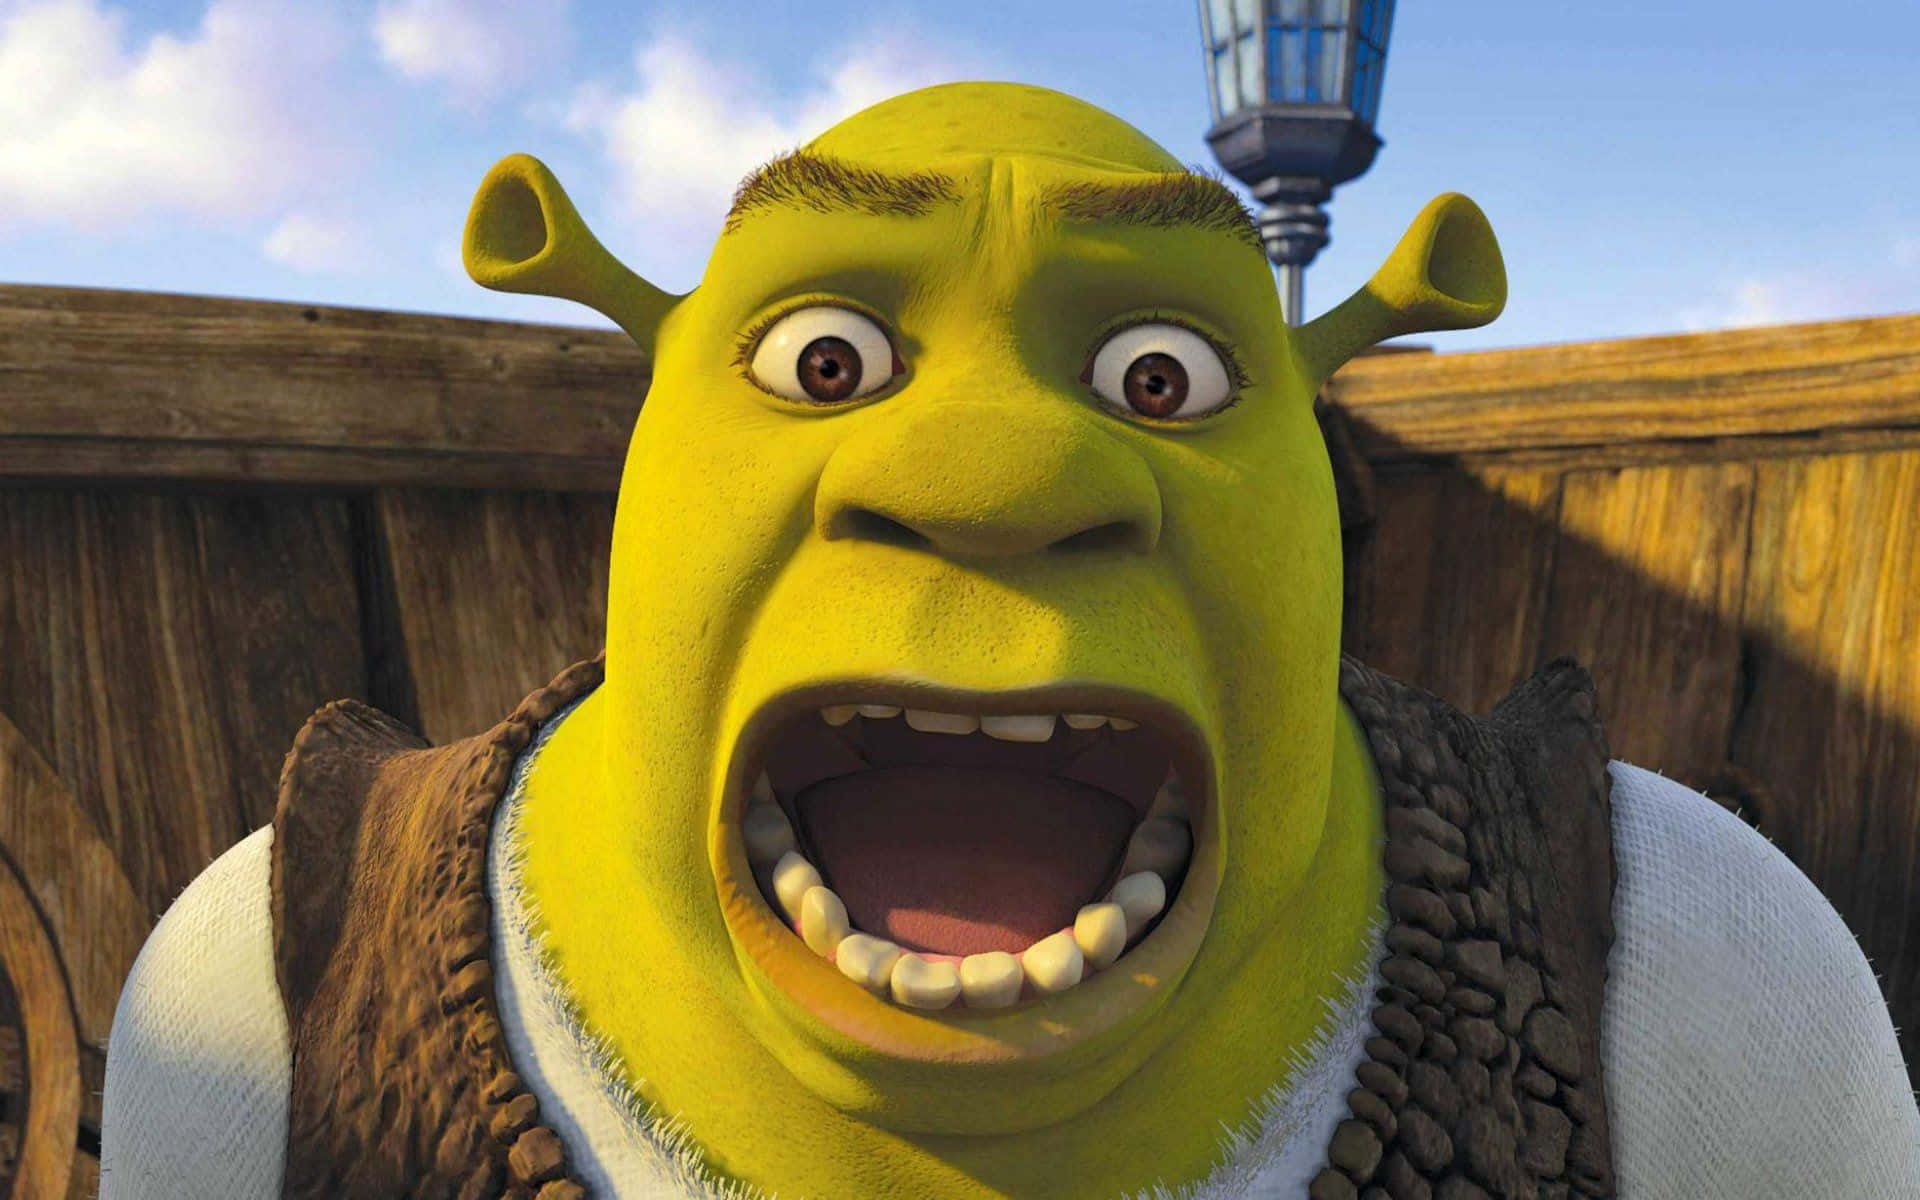 Shrekskrattar Högt! (this Can Be Used As A Tagline For A Wallpaper Featuring Shrek Laughing.)